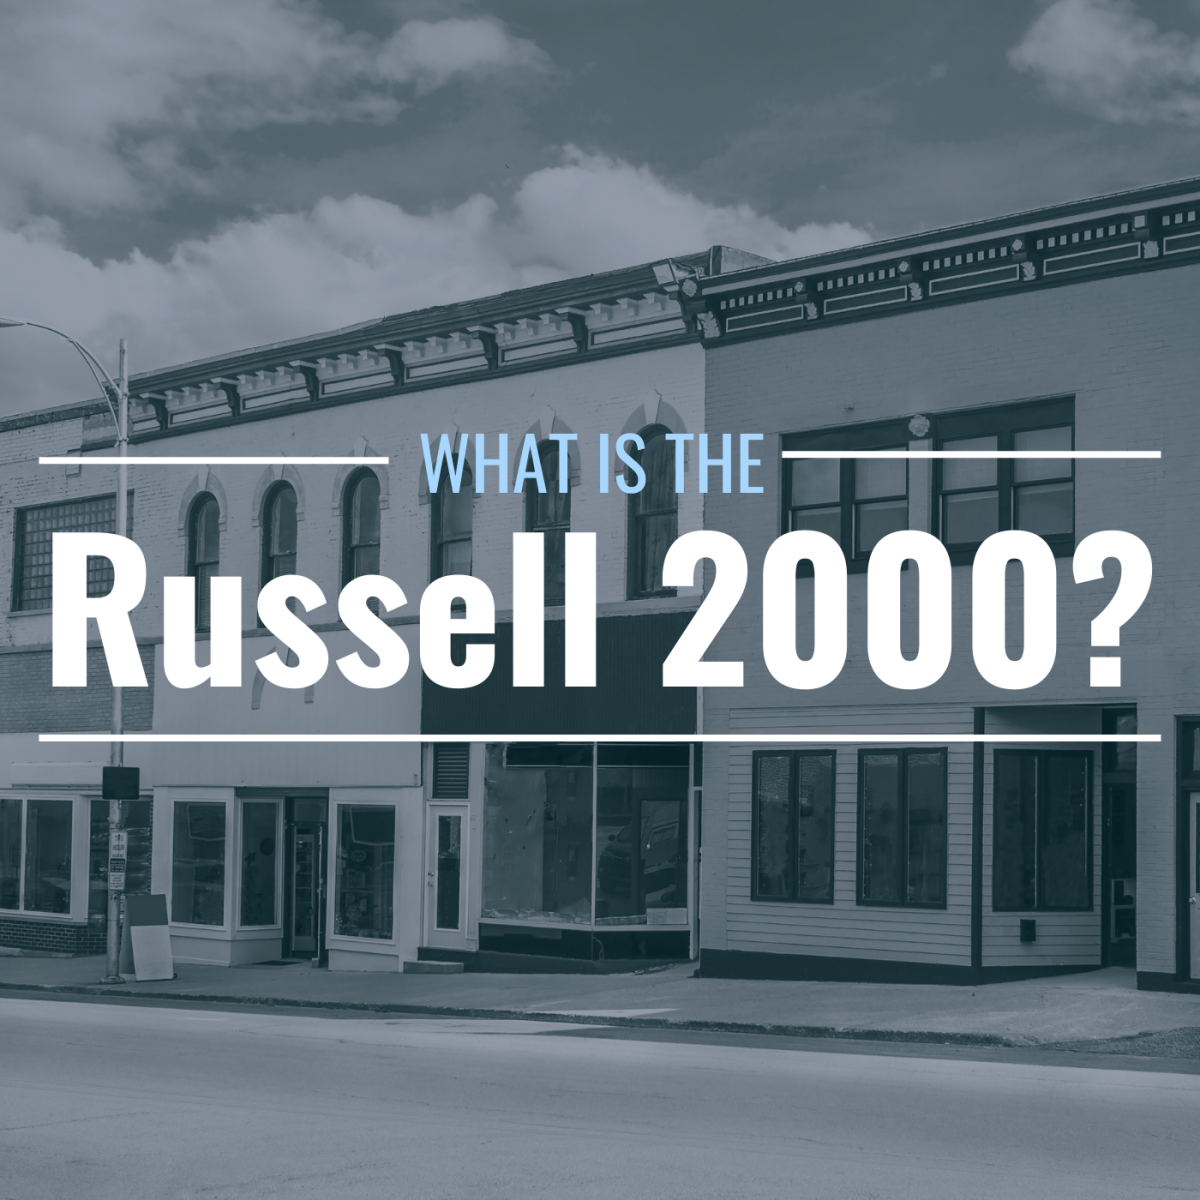 Midwestern Storefronts with the text overlay: "What is the Russell 2000 Stock Market Index?"